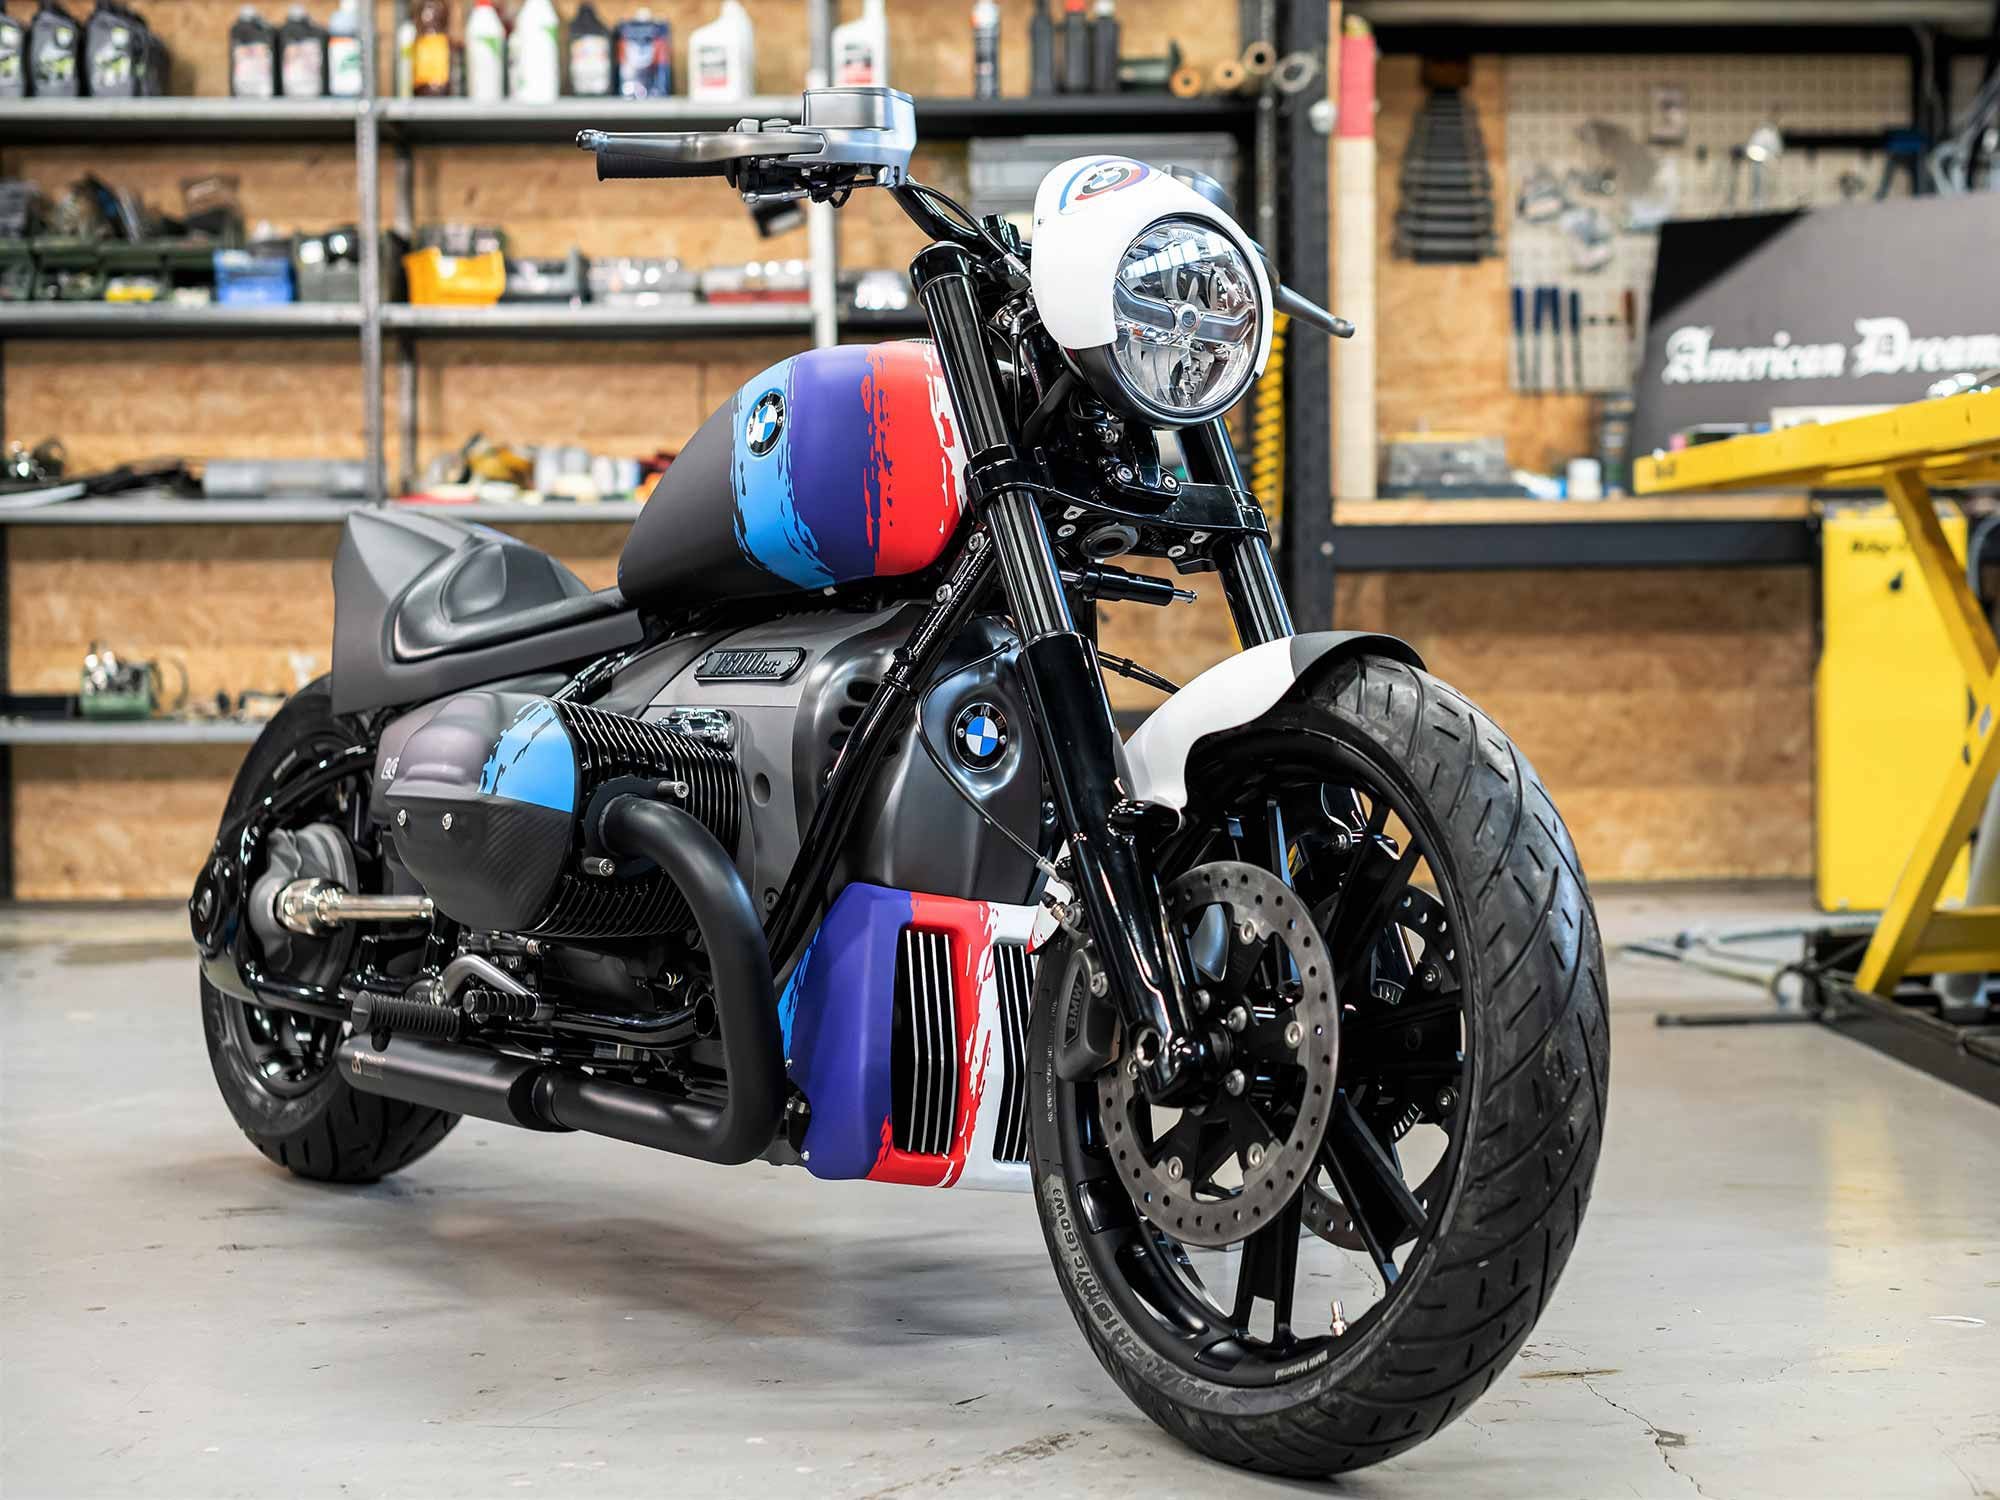 The latest BMW custom is this sporty R 18 M build, unveiled at the Verona Motor Bike Expo in Italy.